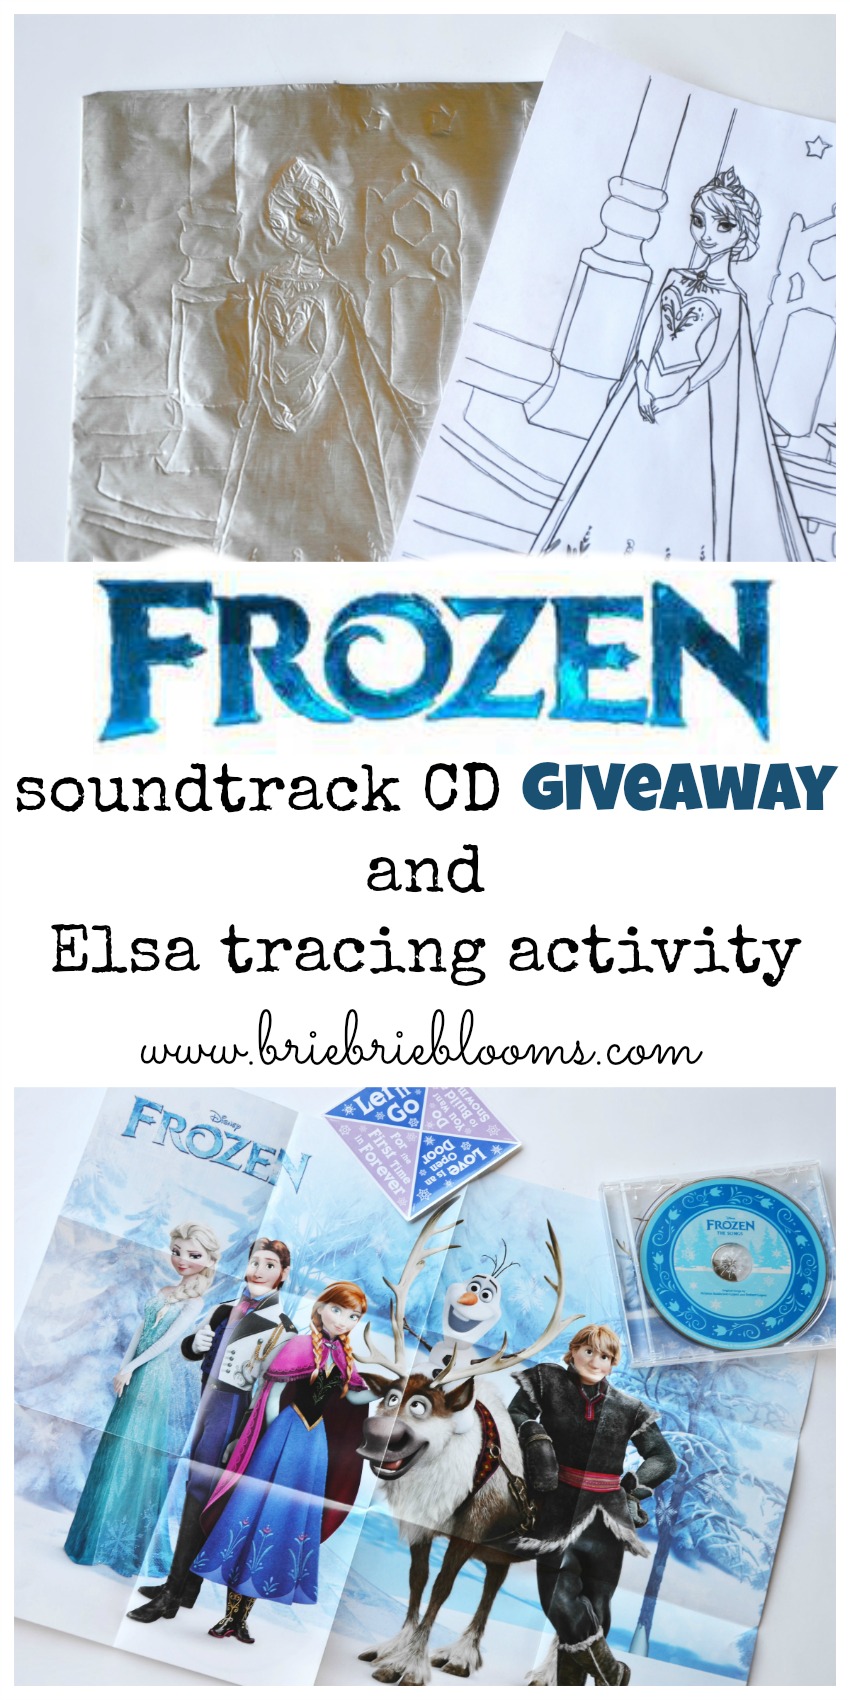 FROZEN soundtrack CD giveaway and Elsa tracing activity - Brie Brie Blooms